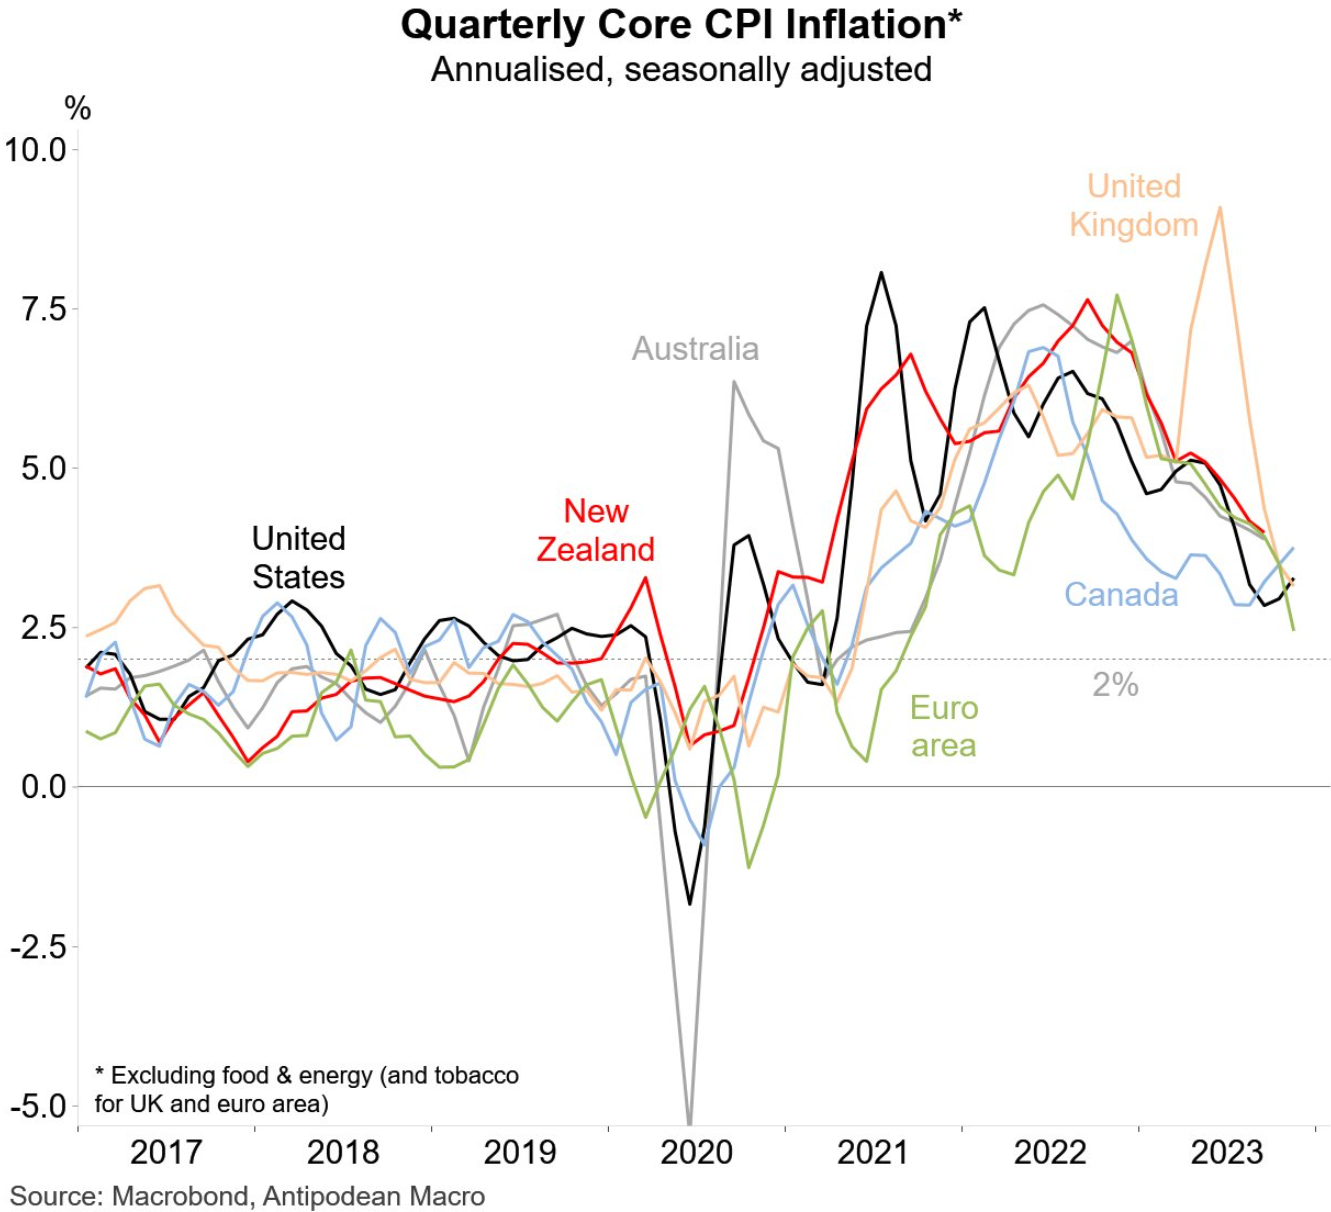 Global core inflation